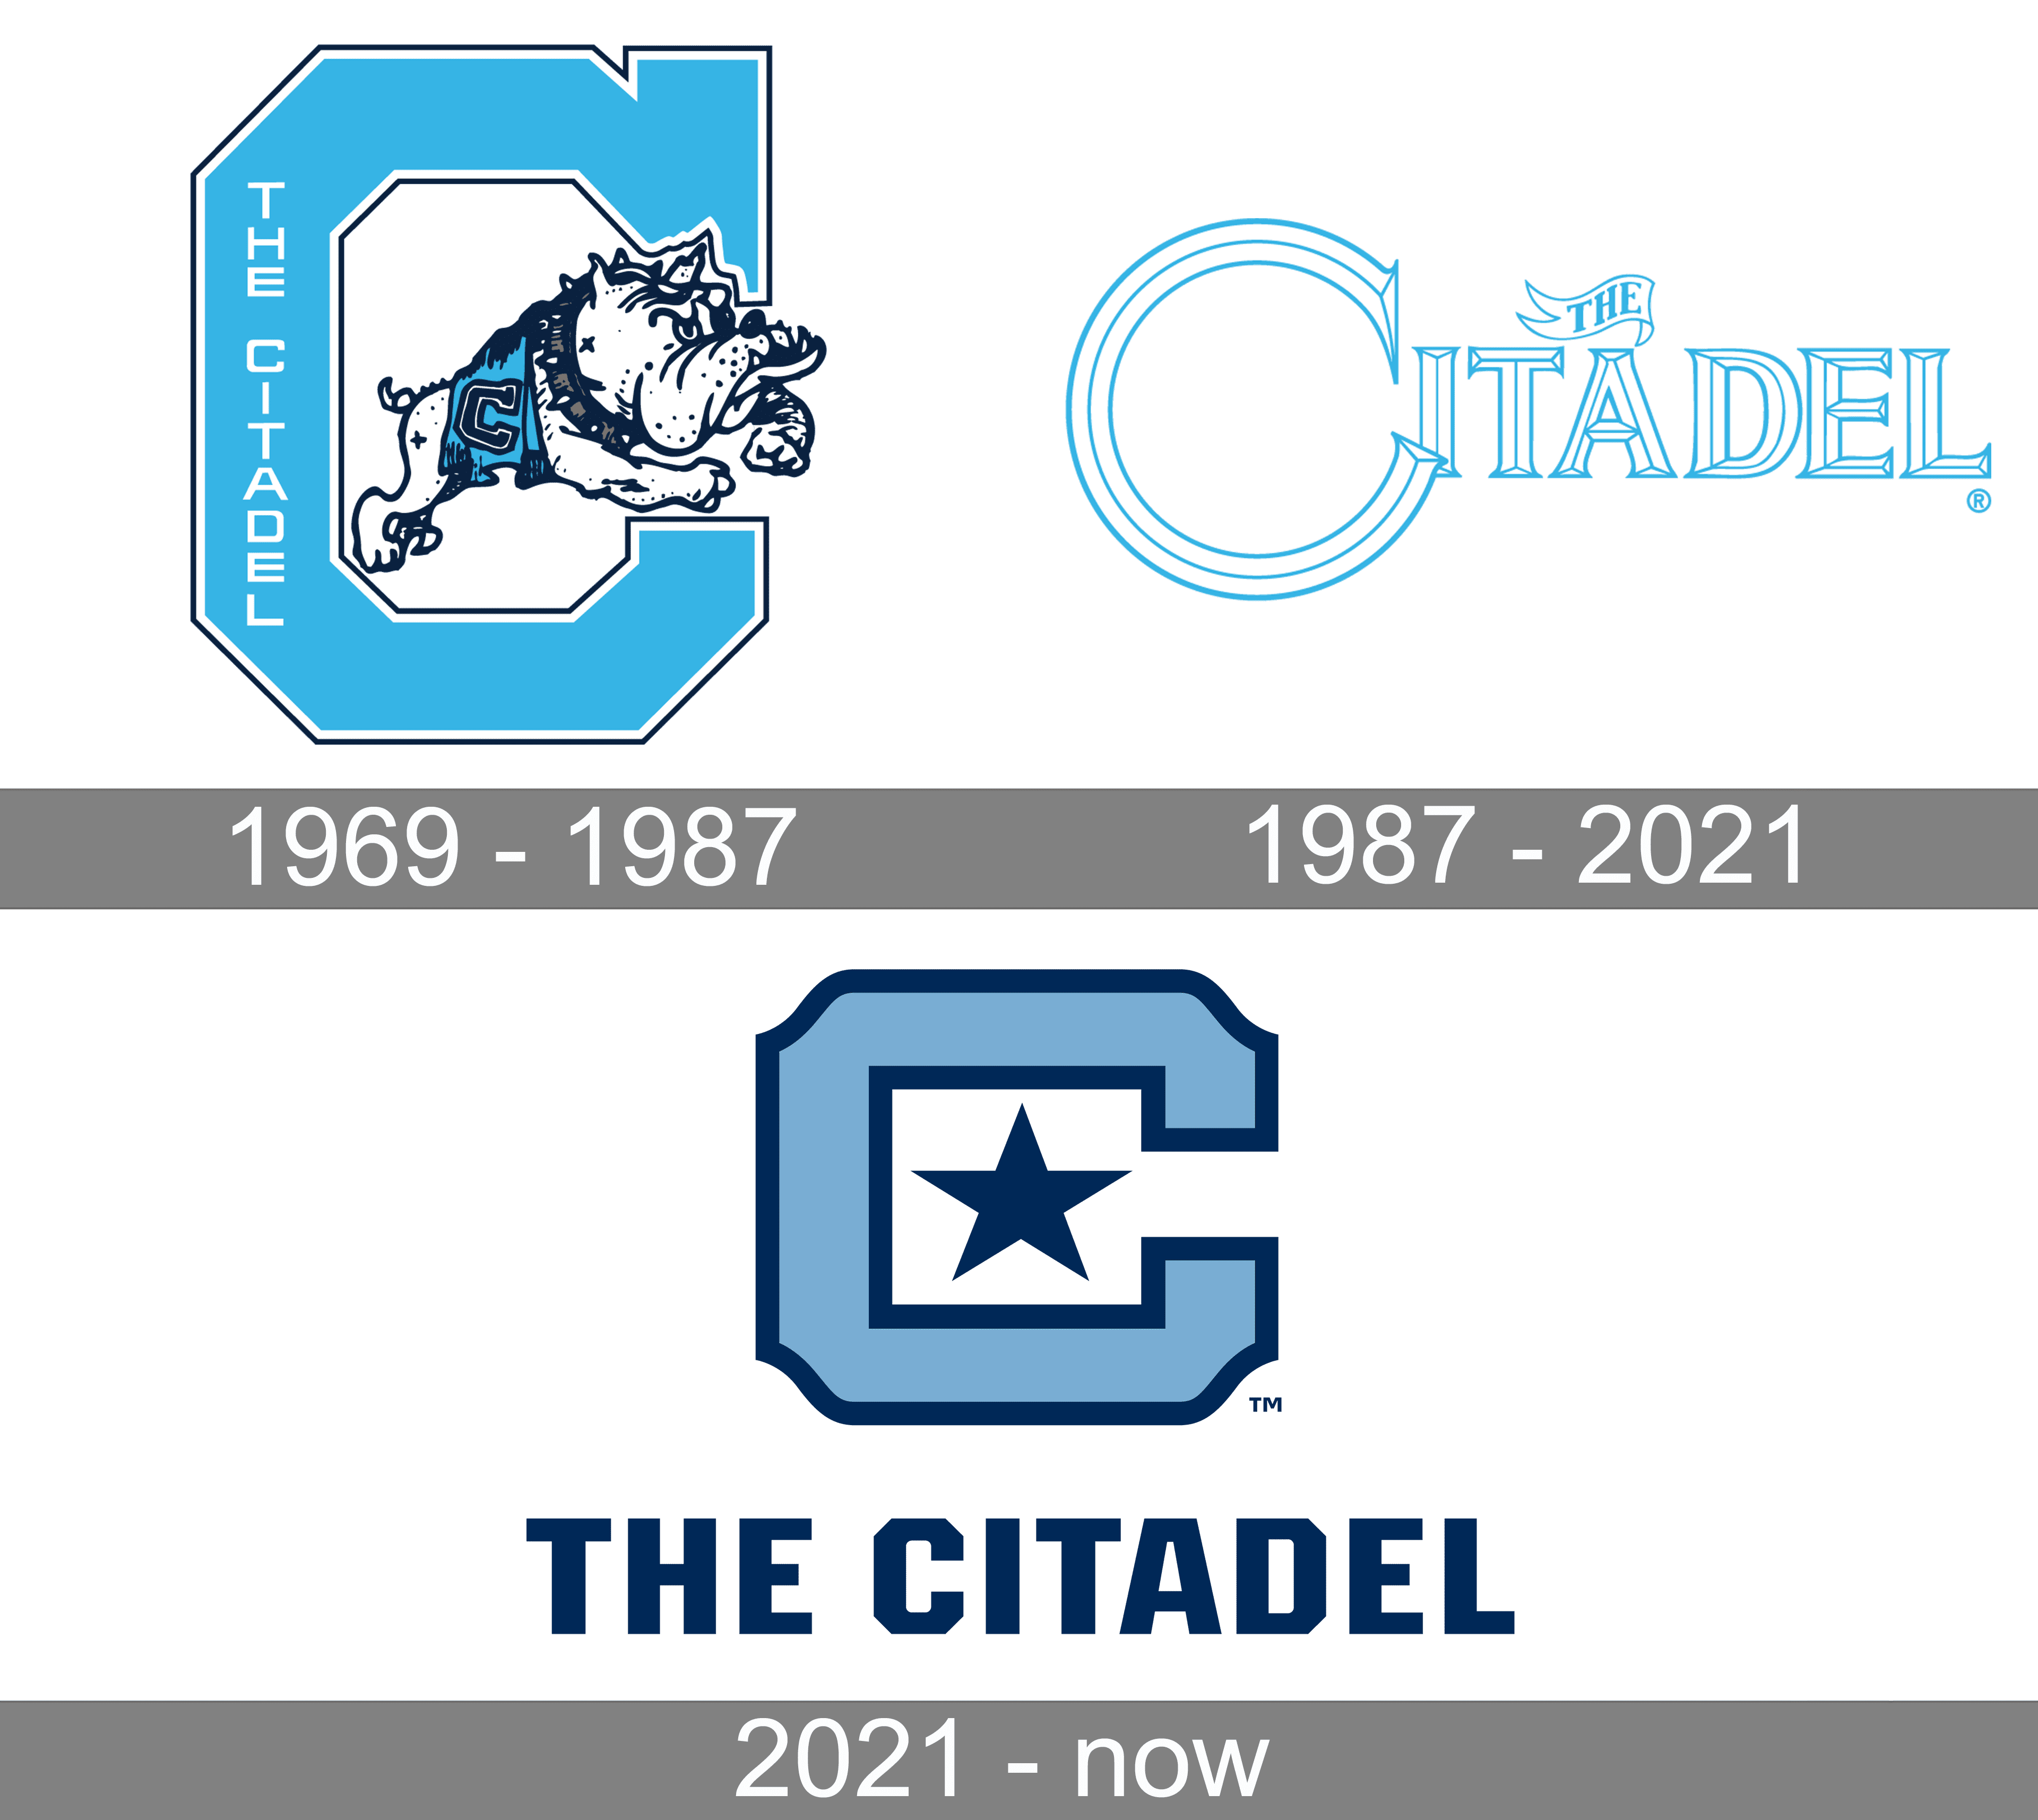 About The Citadel